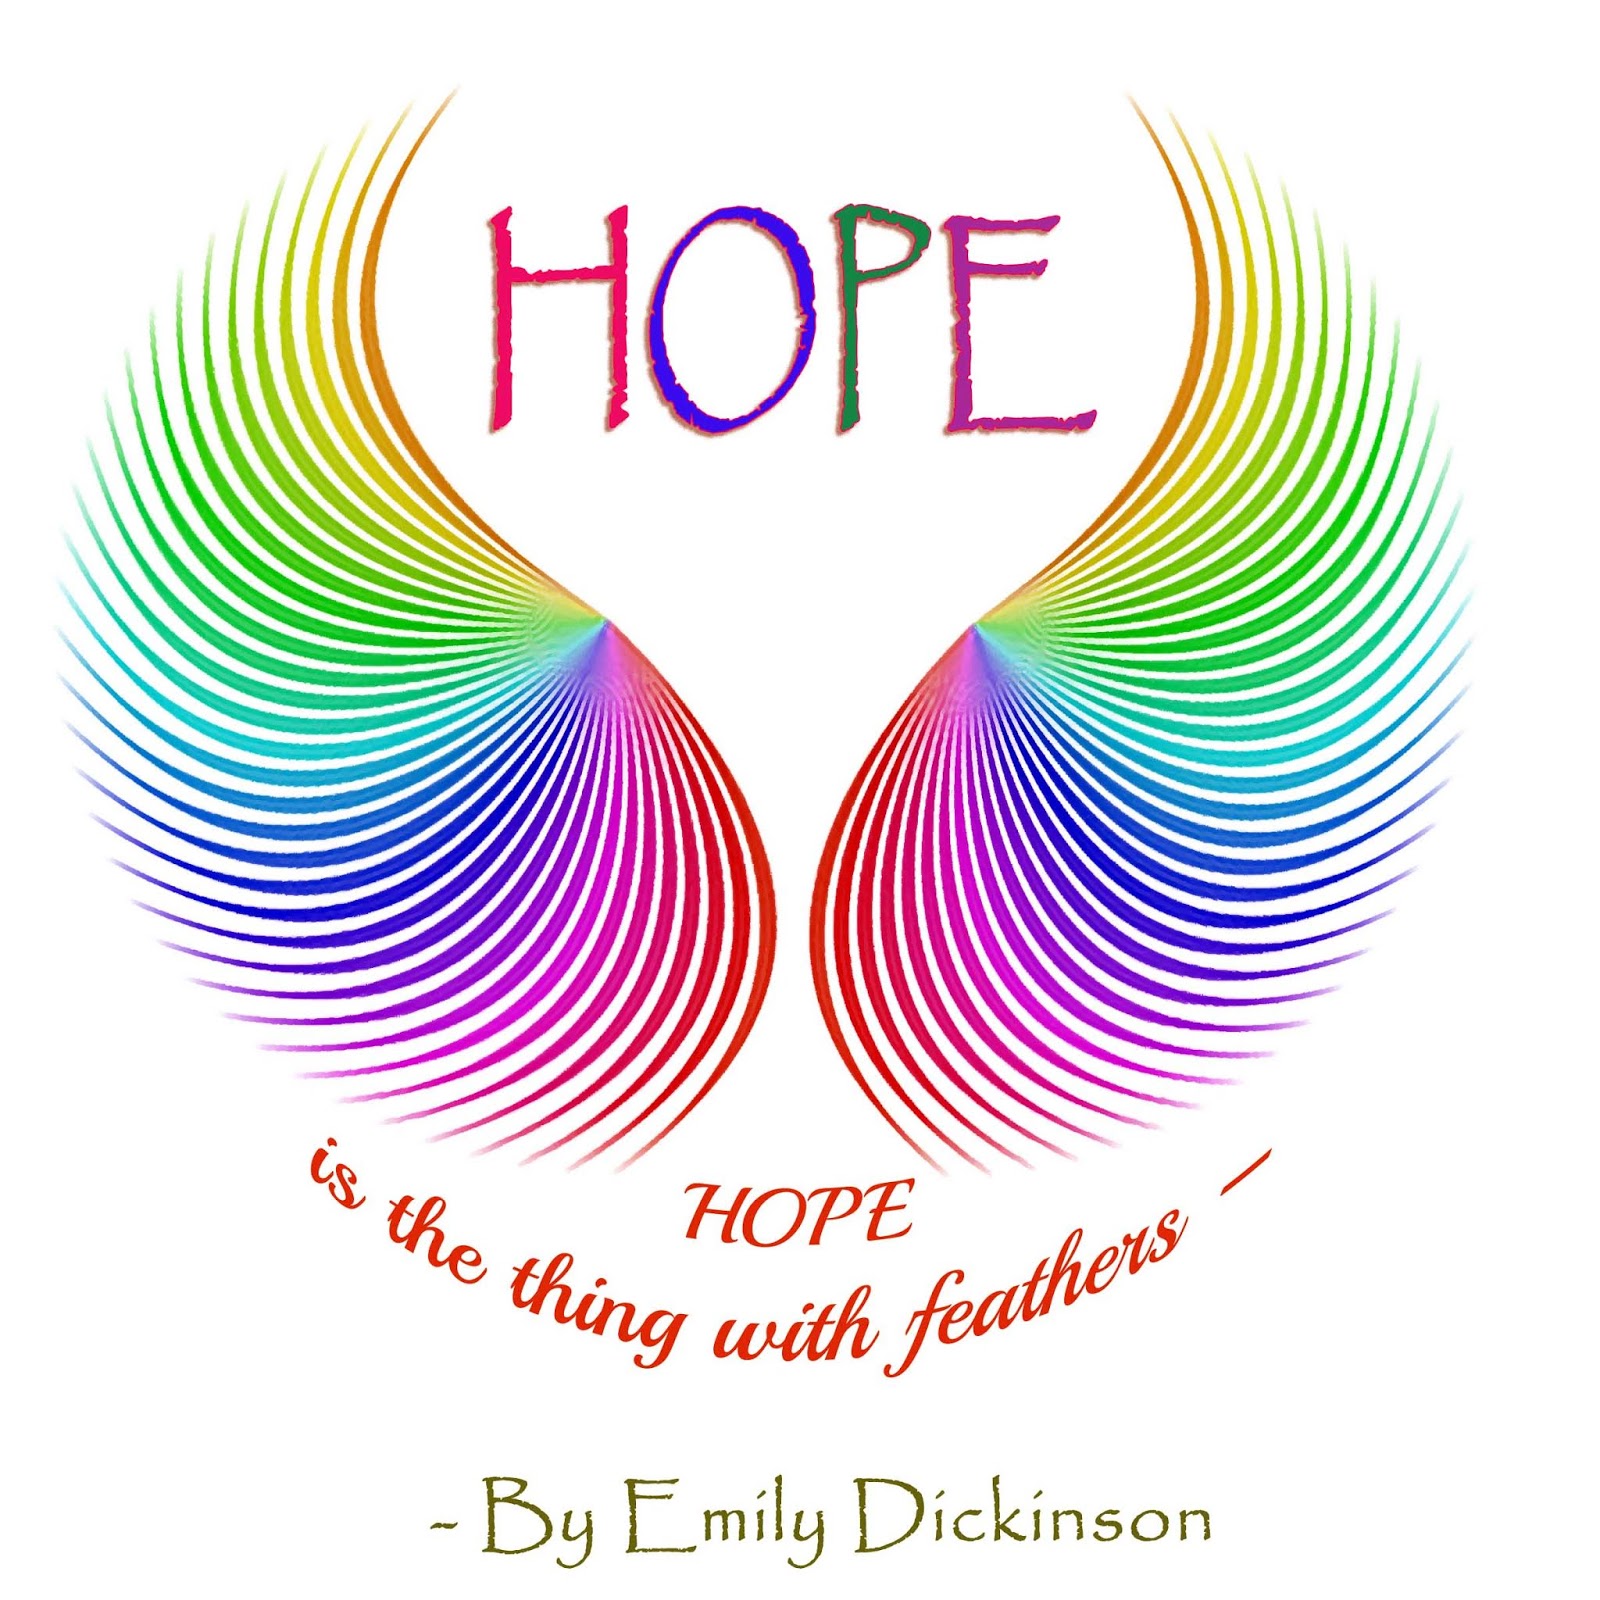 Emily Dickinson hope is the thing with Feathers. Hope is the thing with Feathers by Emily Dickinson. Hope is the thing with Feathers by Emily Dickinson перевод.